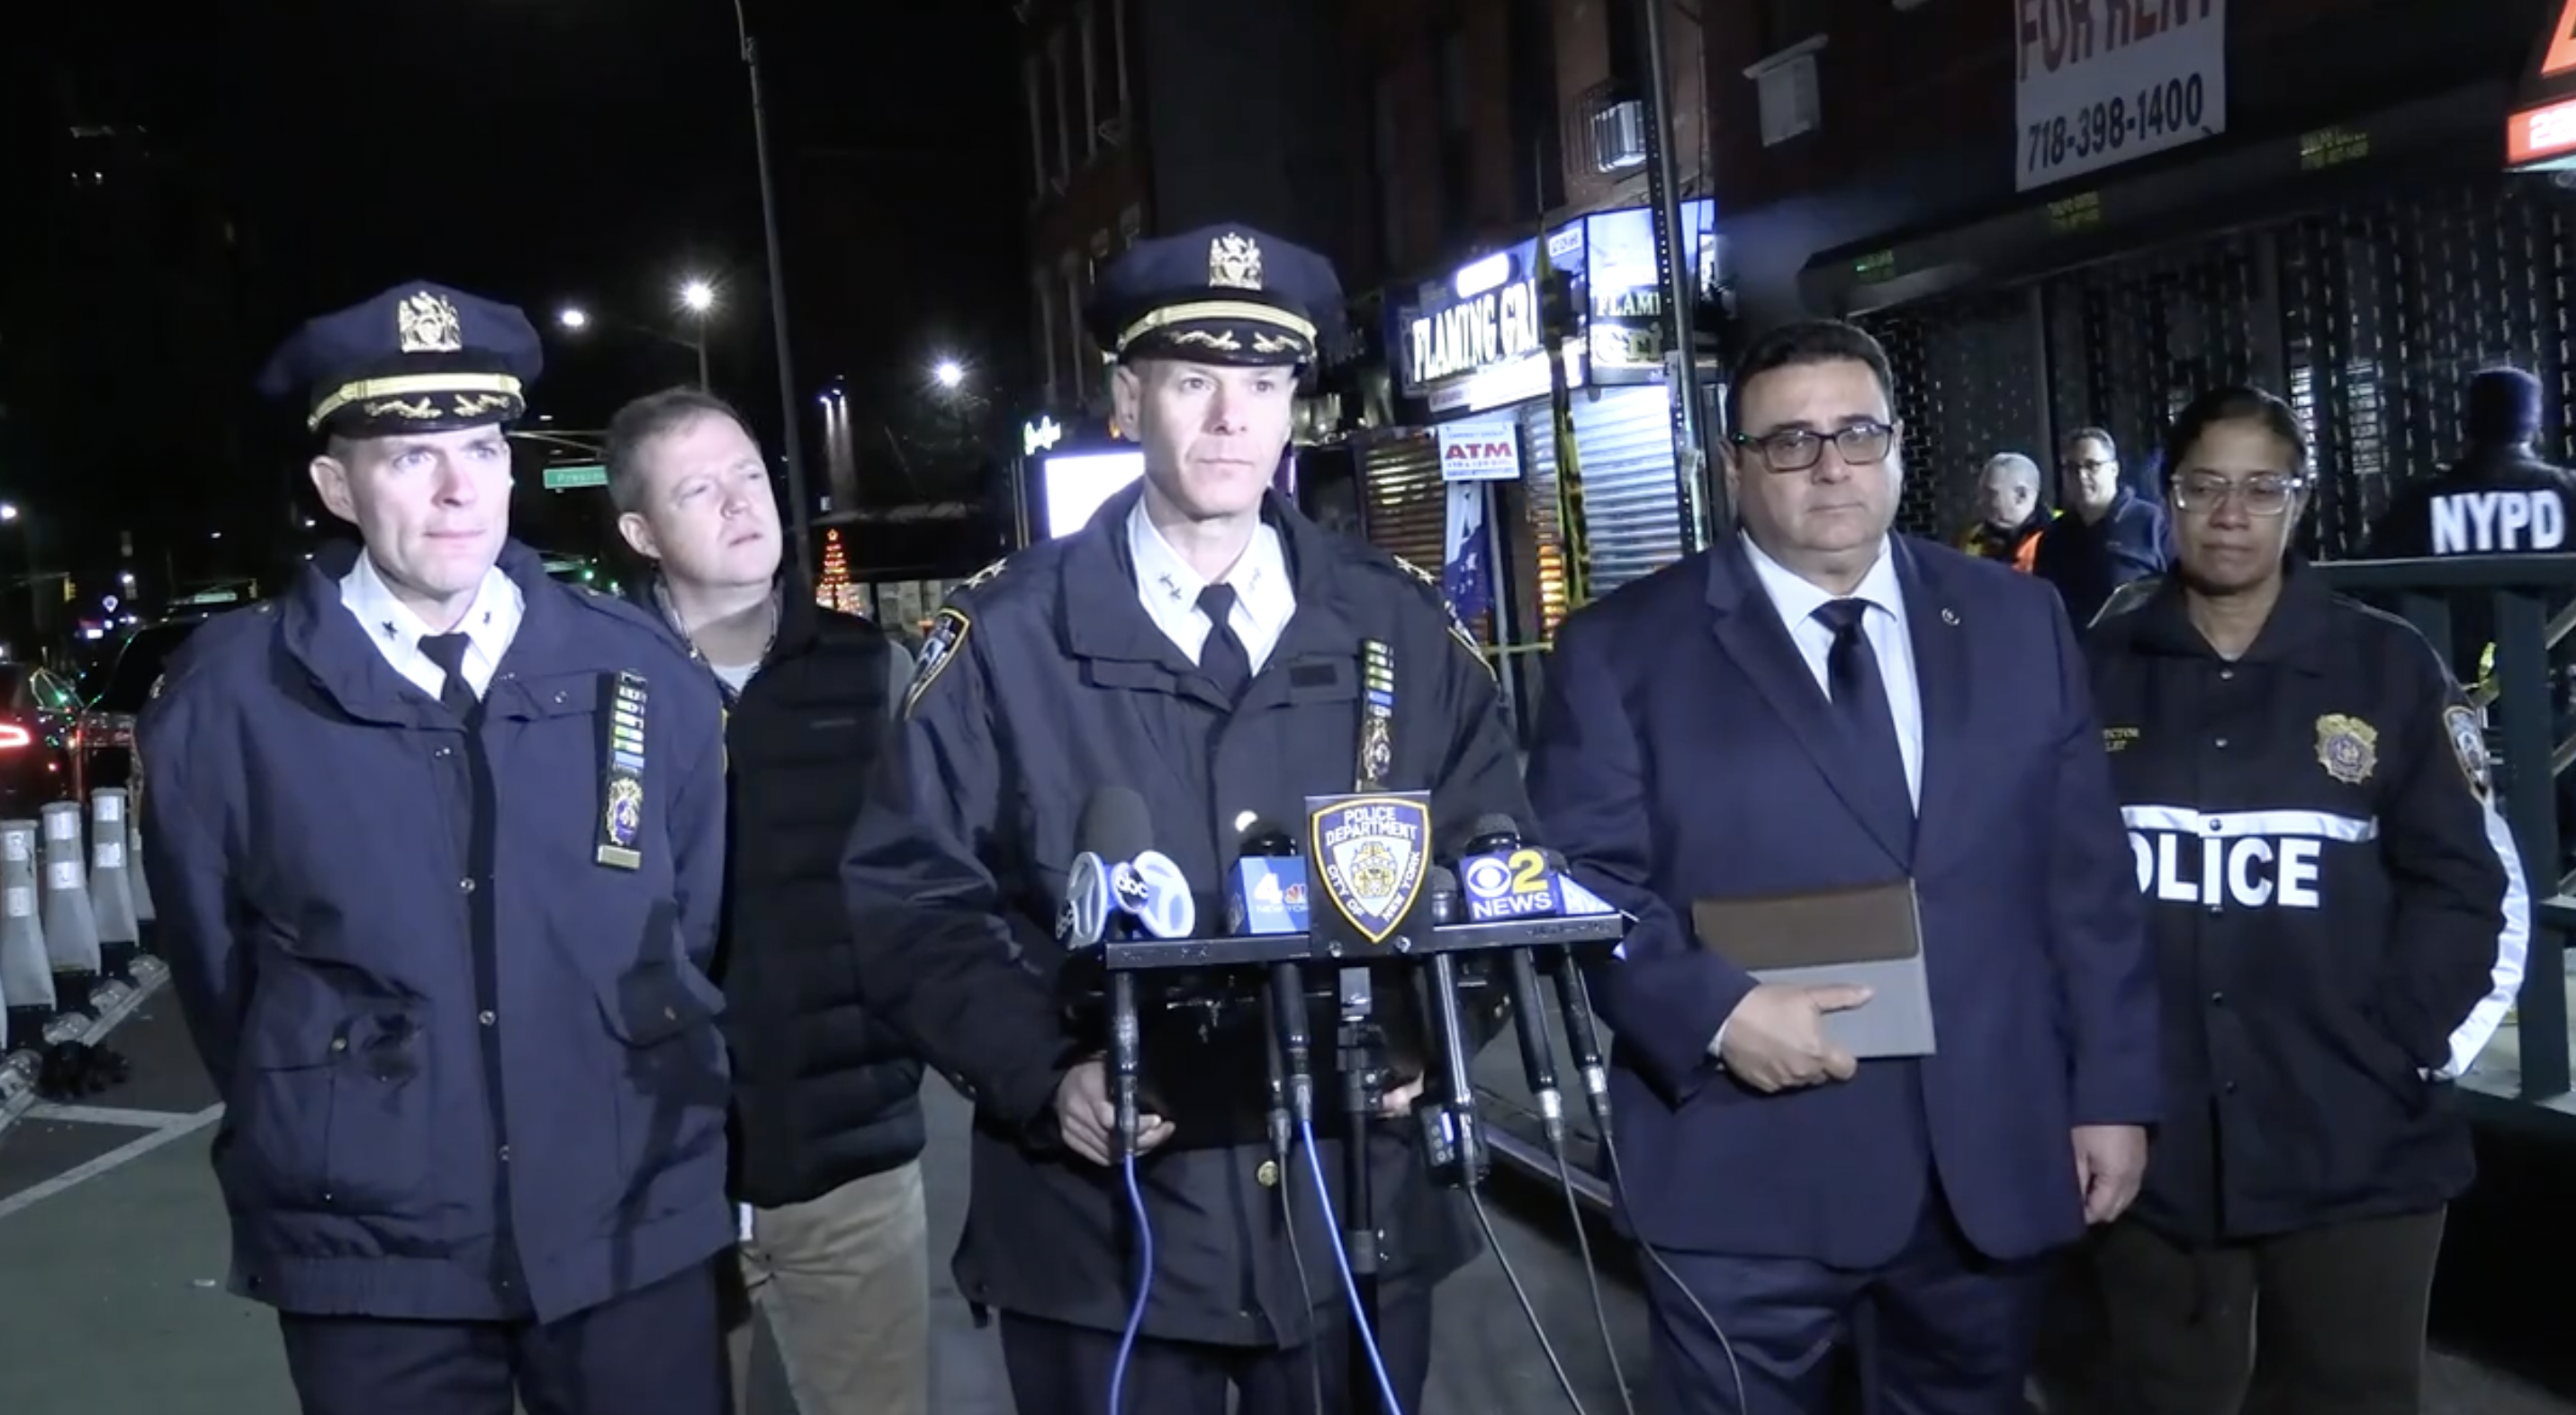 A photo of police and transit officials briefing reporters on a Tuesday night shooting